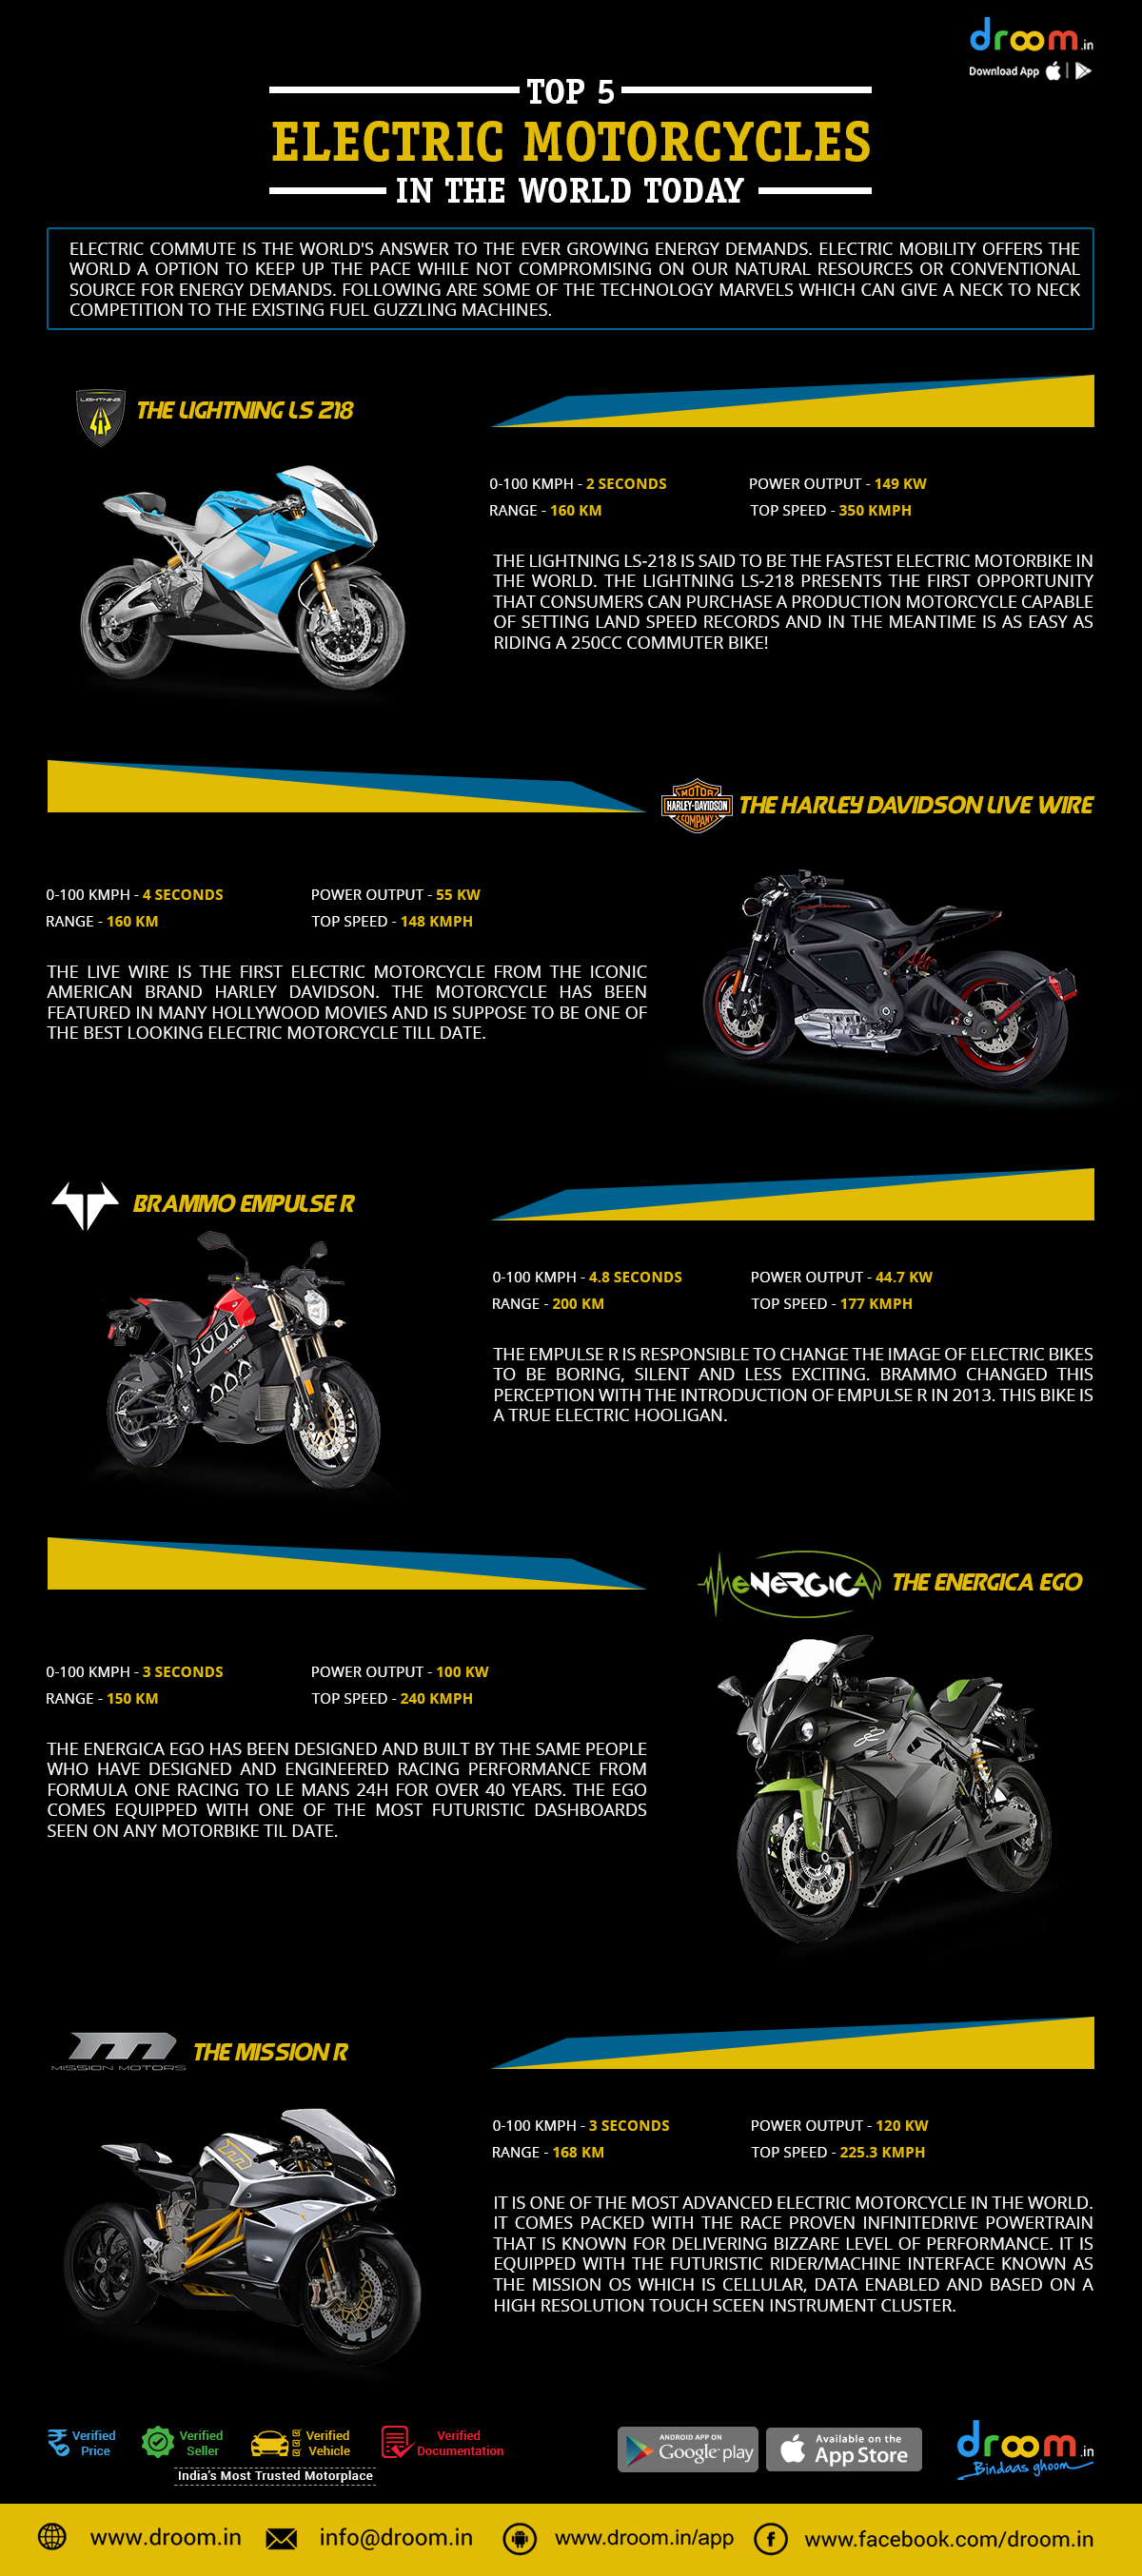 Top 5 Electric Motorcycles